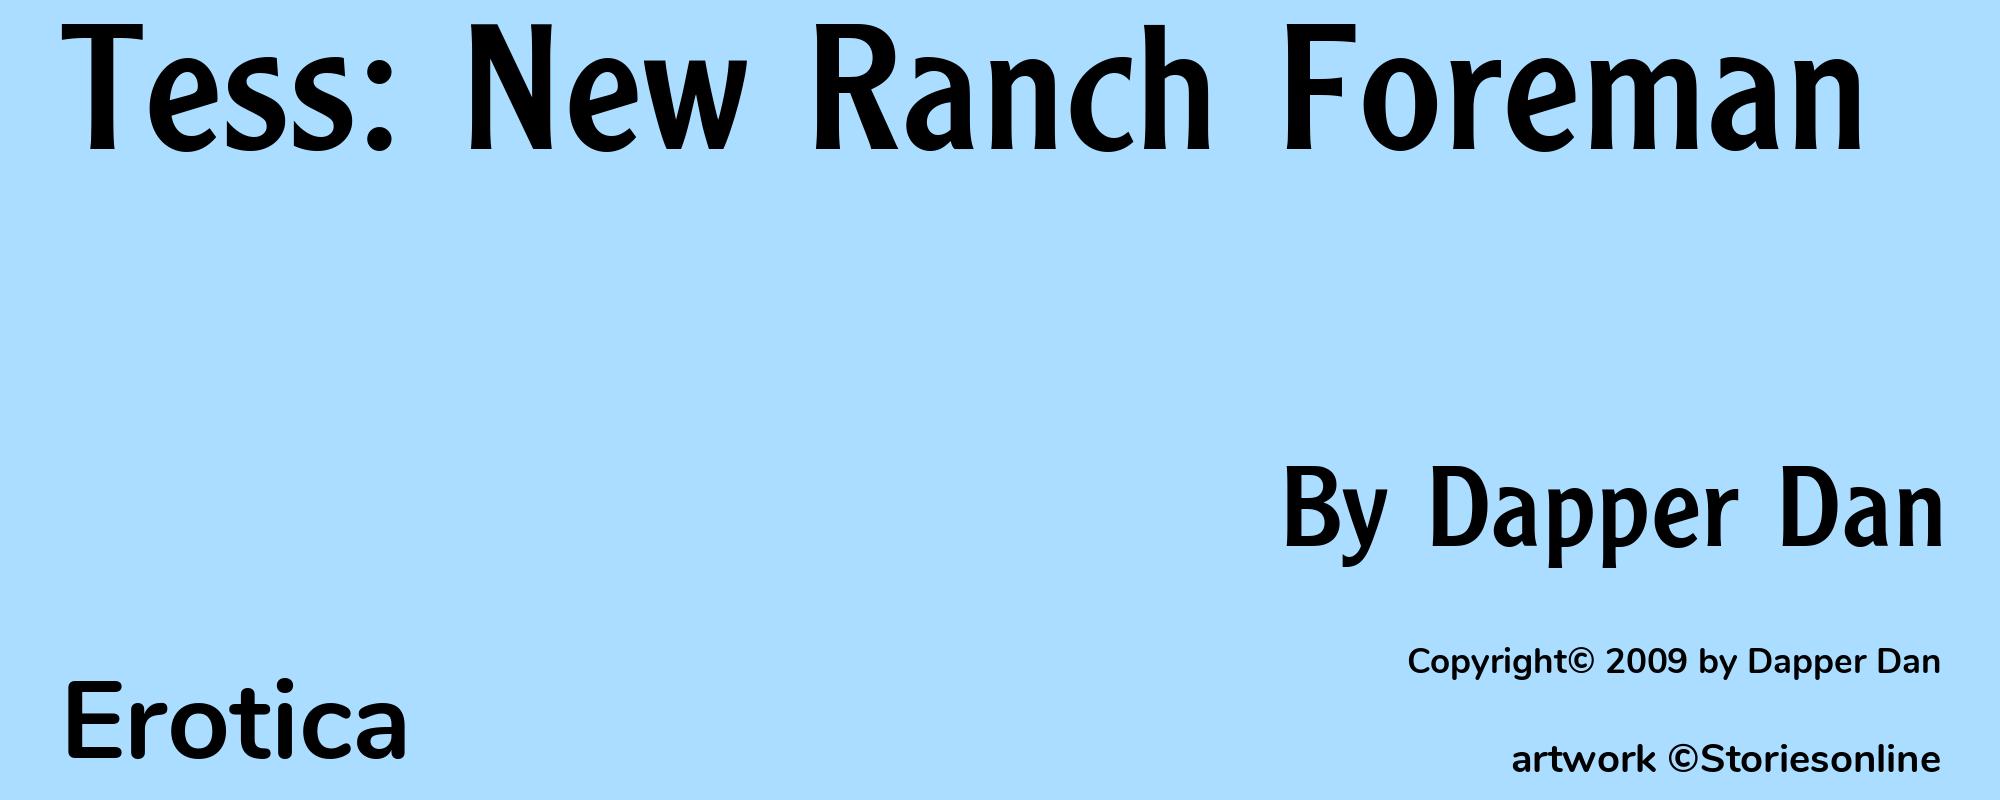 Tess: New Ranch Foreman - Cover